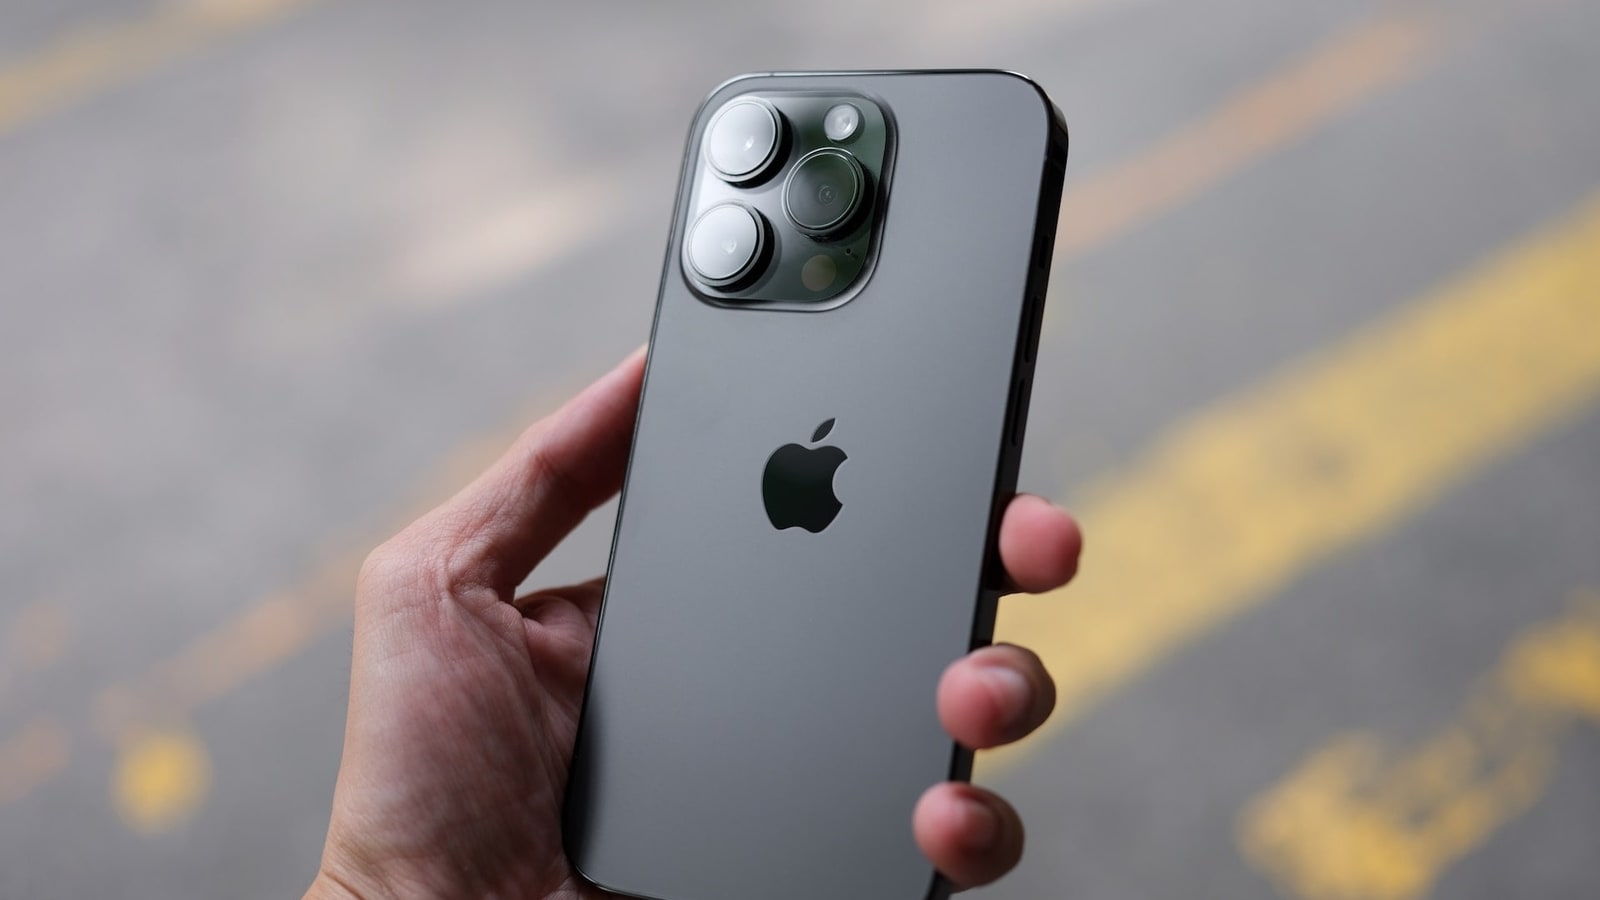 After professional testing, the iPhone 15 Pro Max is not the best phone for photography